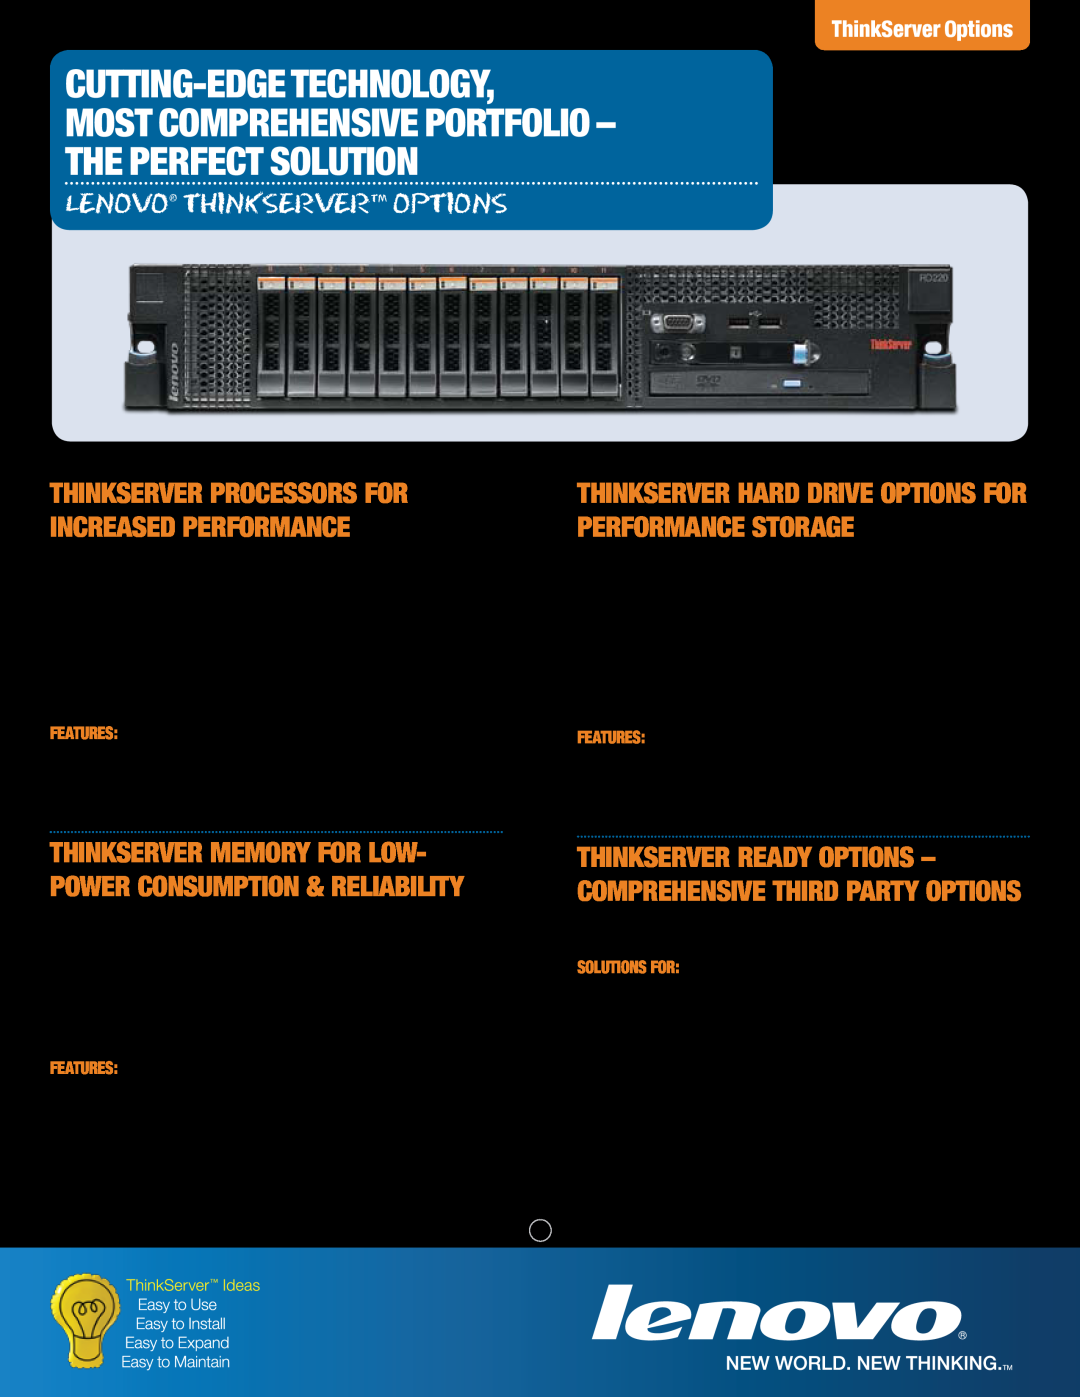 Lenovo 5500 Series manual Cutting-EdgeTechnology, Most Comprehensive Portfolio, the Perfect Solution, ThinkServer Options 